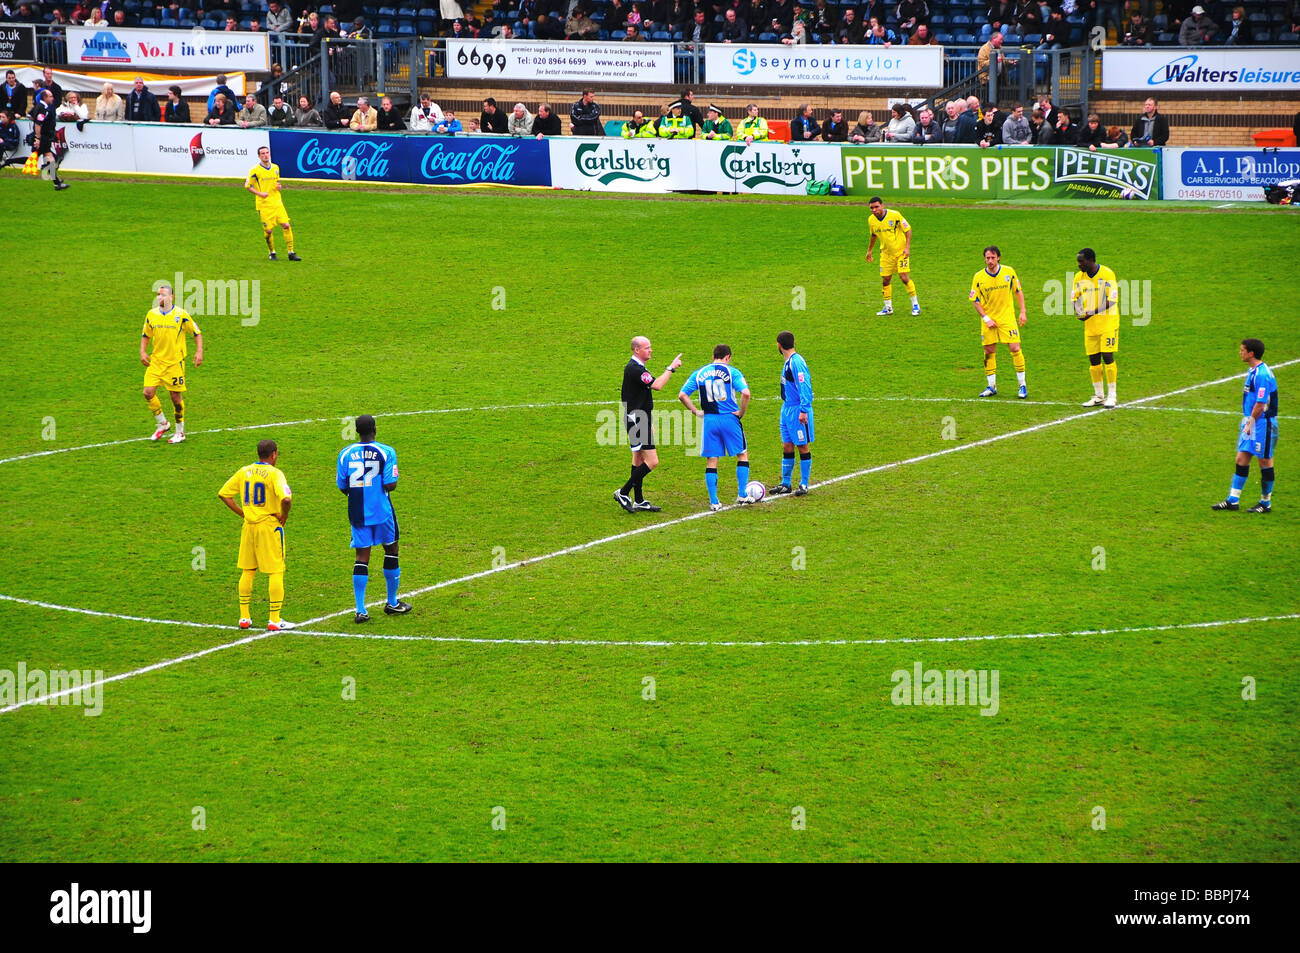 Kick-off at a football match - Wycombe Wanderers vs. Gillingham - 2009 Stock Photo